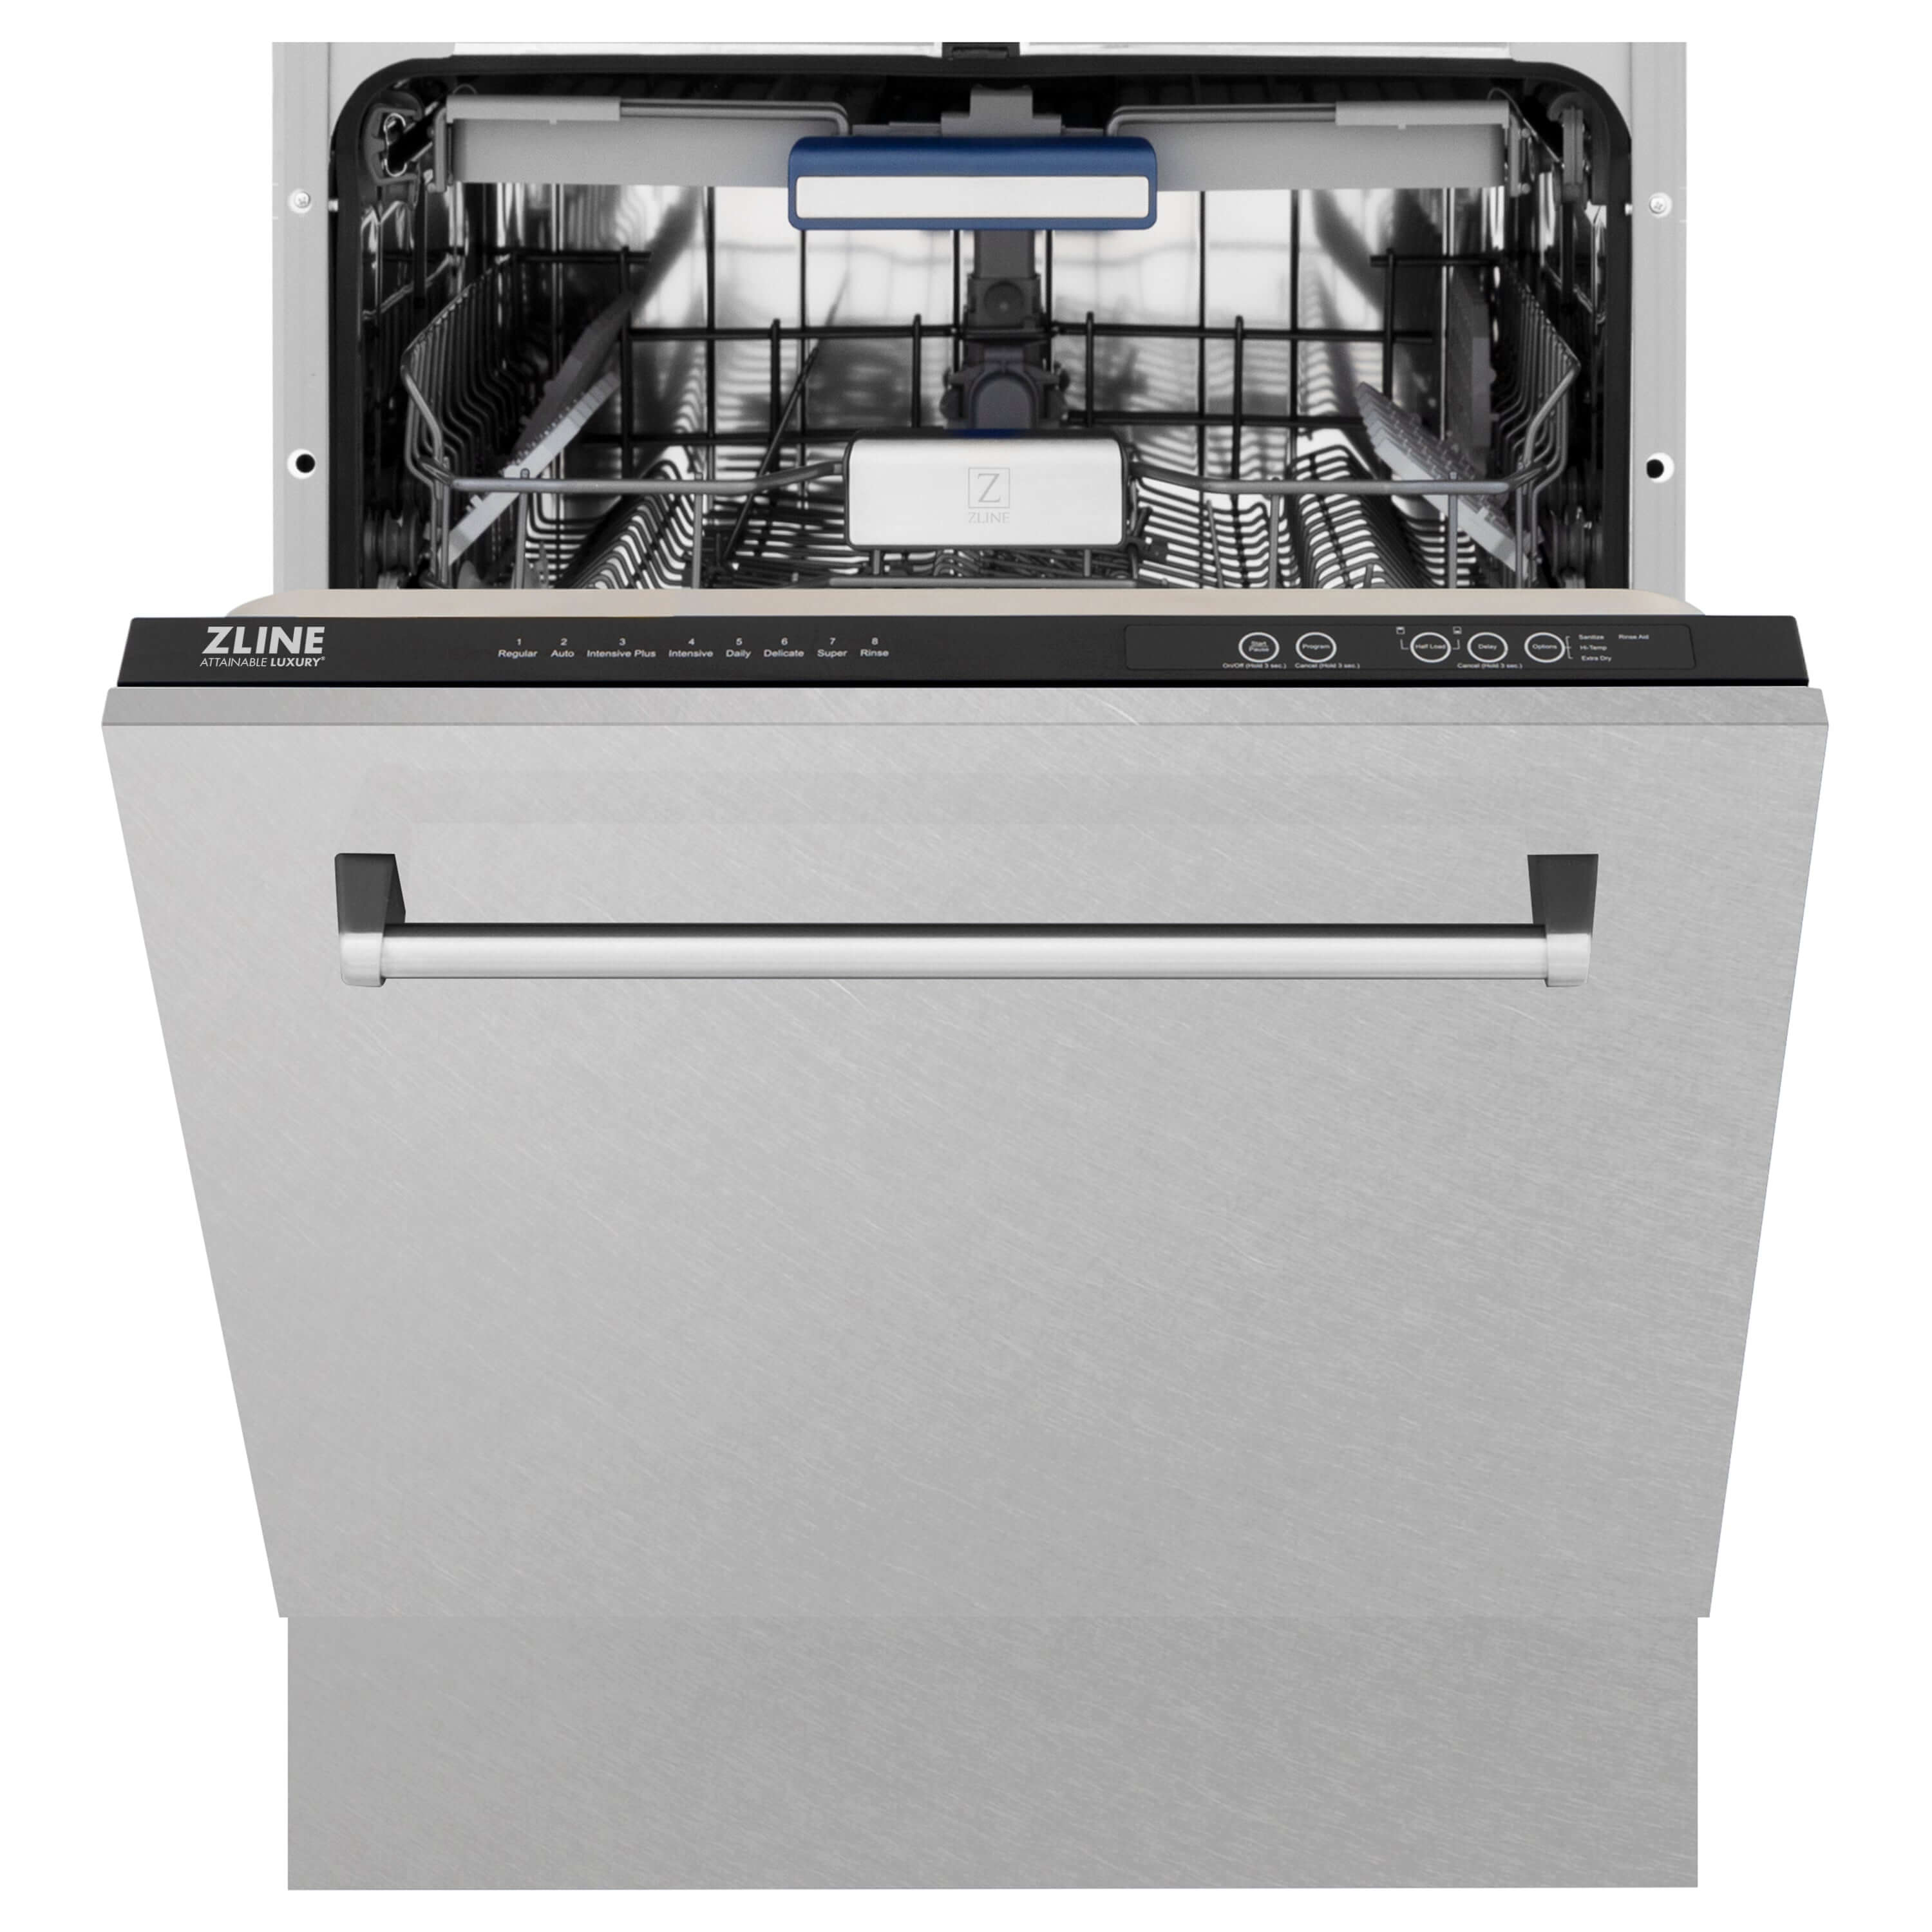 ZLINE 24" Tallac Dishwasher with DuraSnow Stainless Steel Panel and Traditional Handle front with door halfway open.